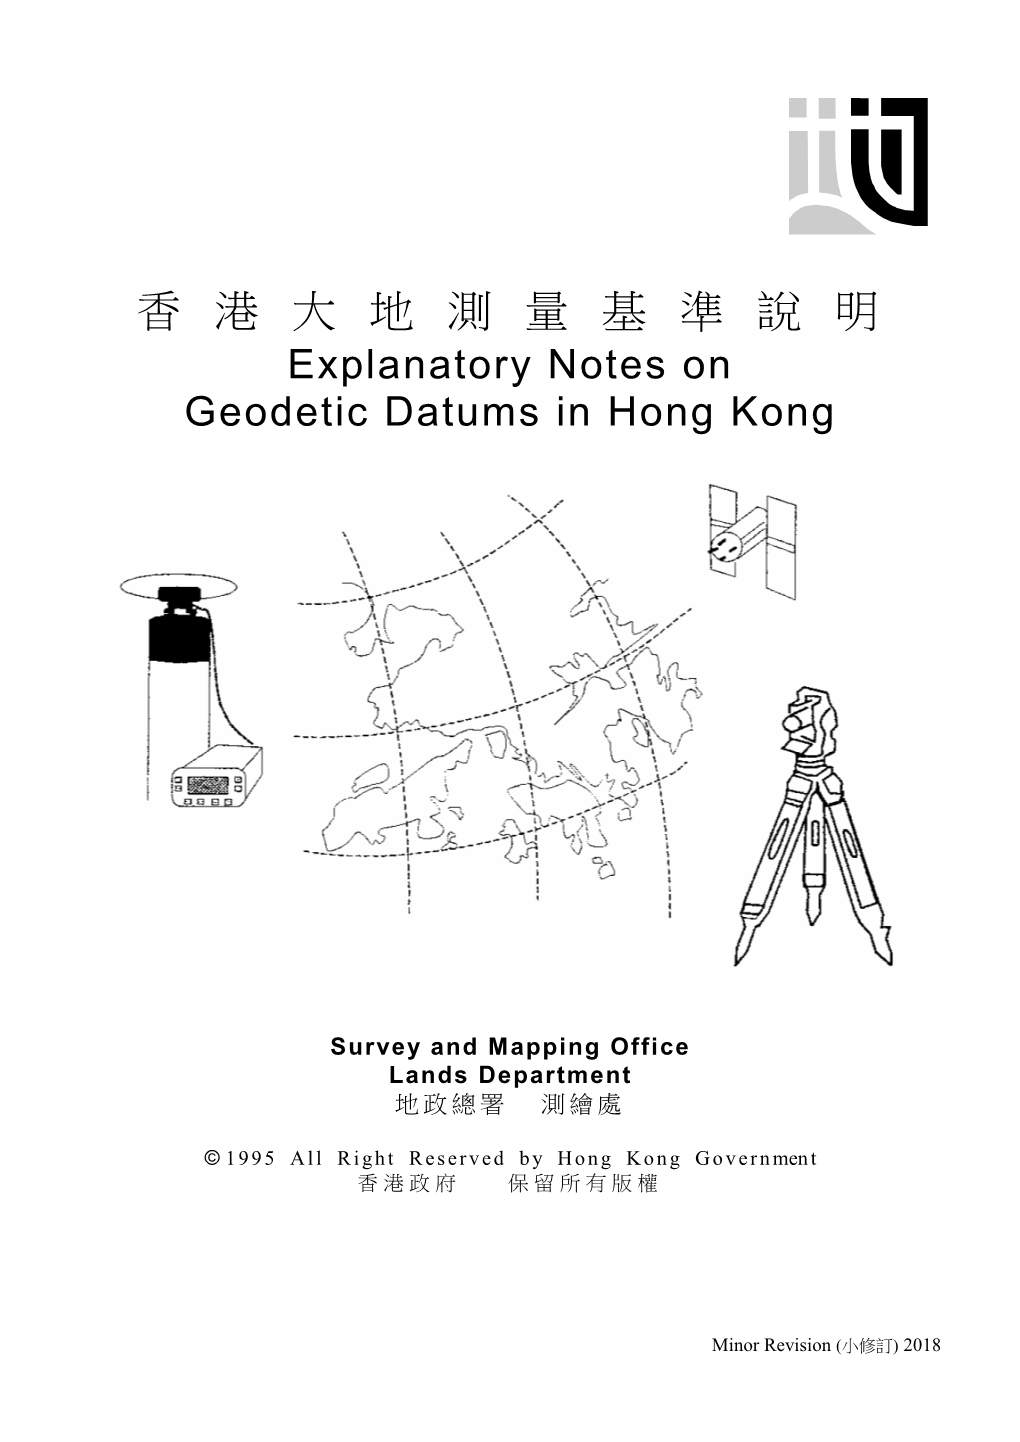 Explanatory Notes on Geodetic Datums in Hong Kong 1995 (Minor